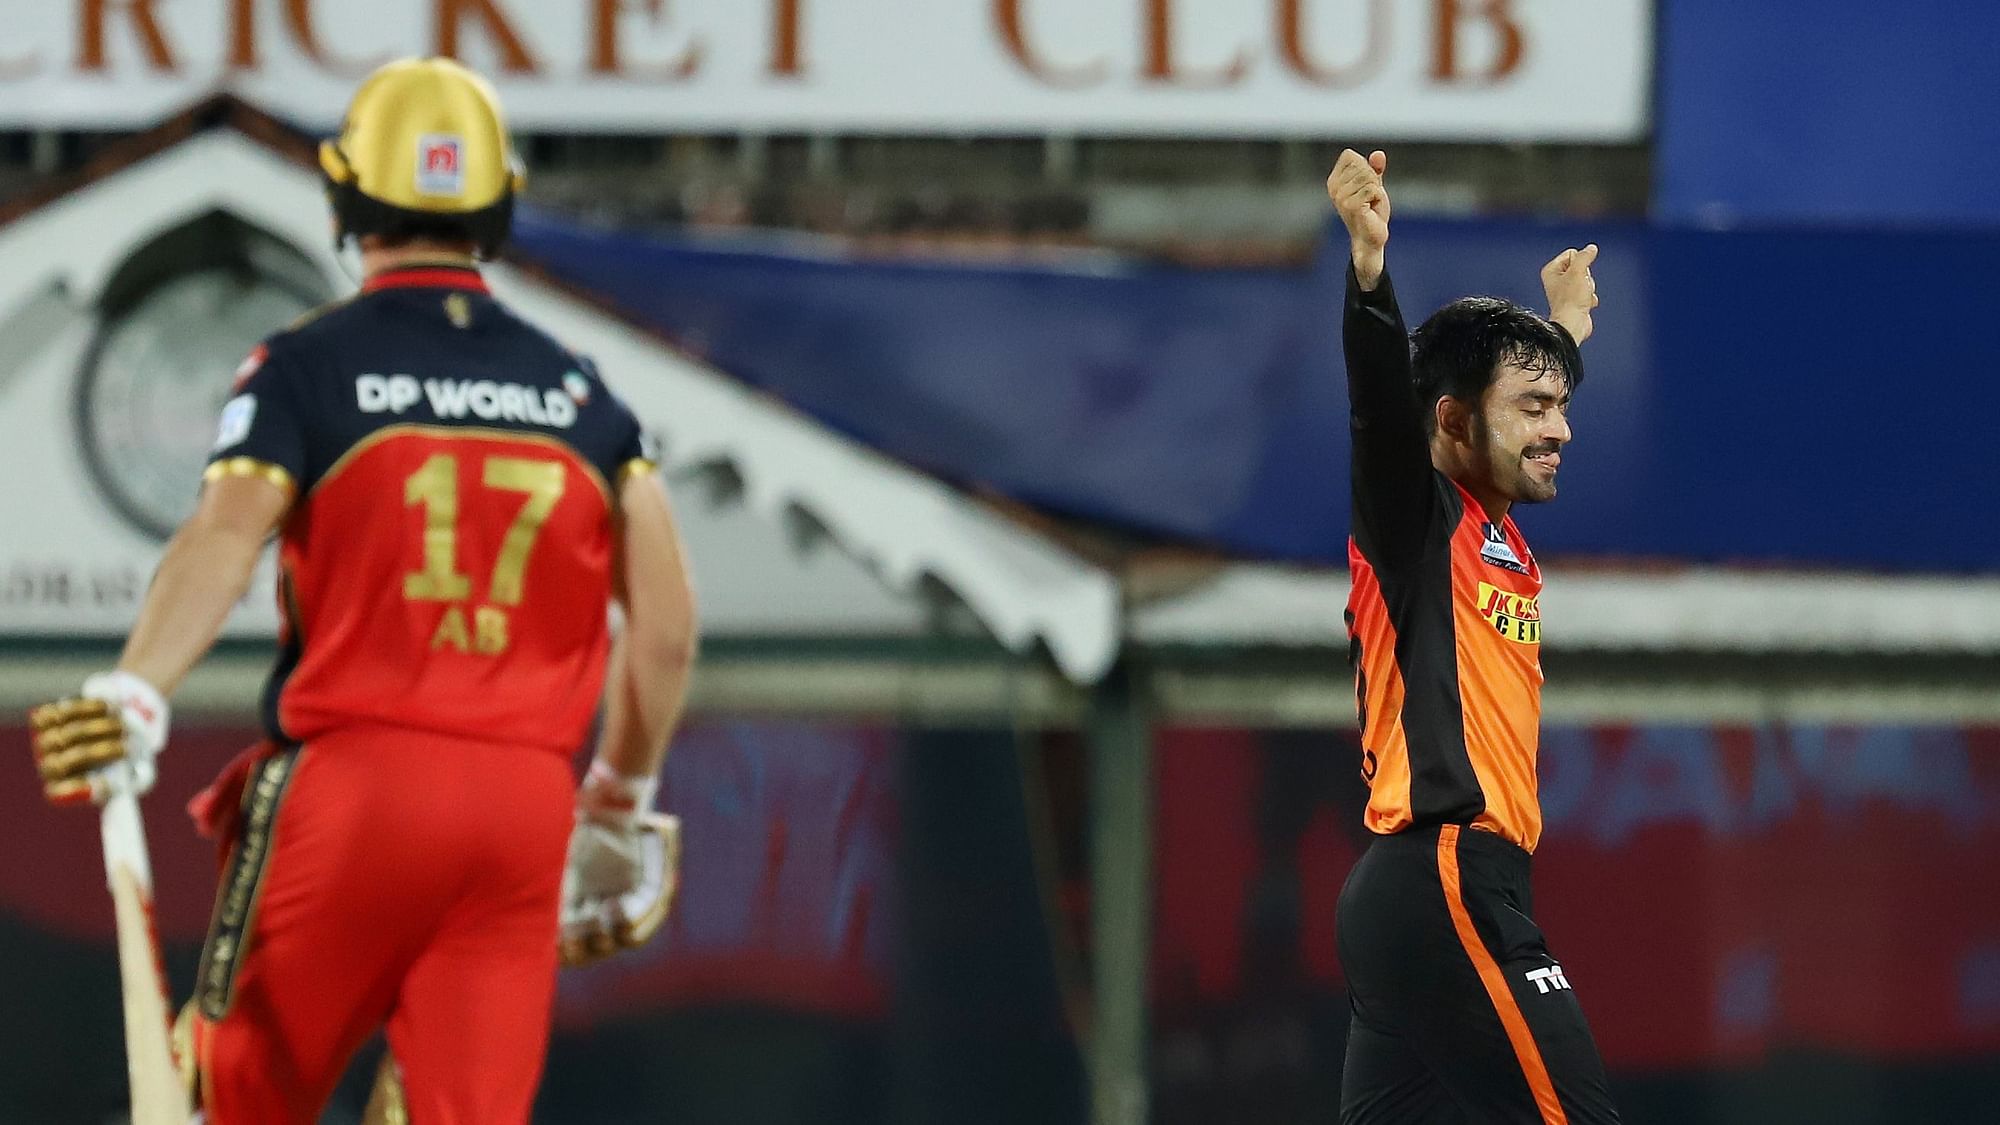 Rashid Khan picked 2 wickets and conceded just 18 runs in his 4 overs vs RCB on Wednesday.